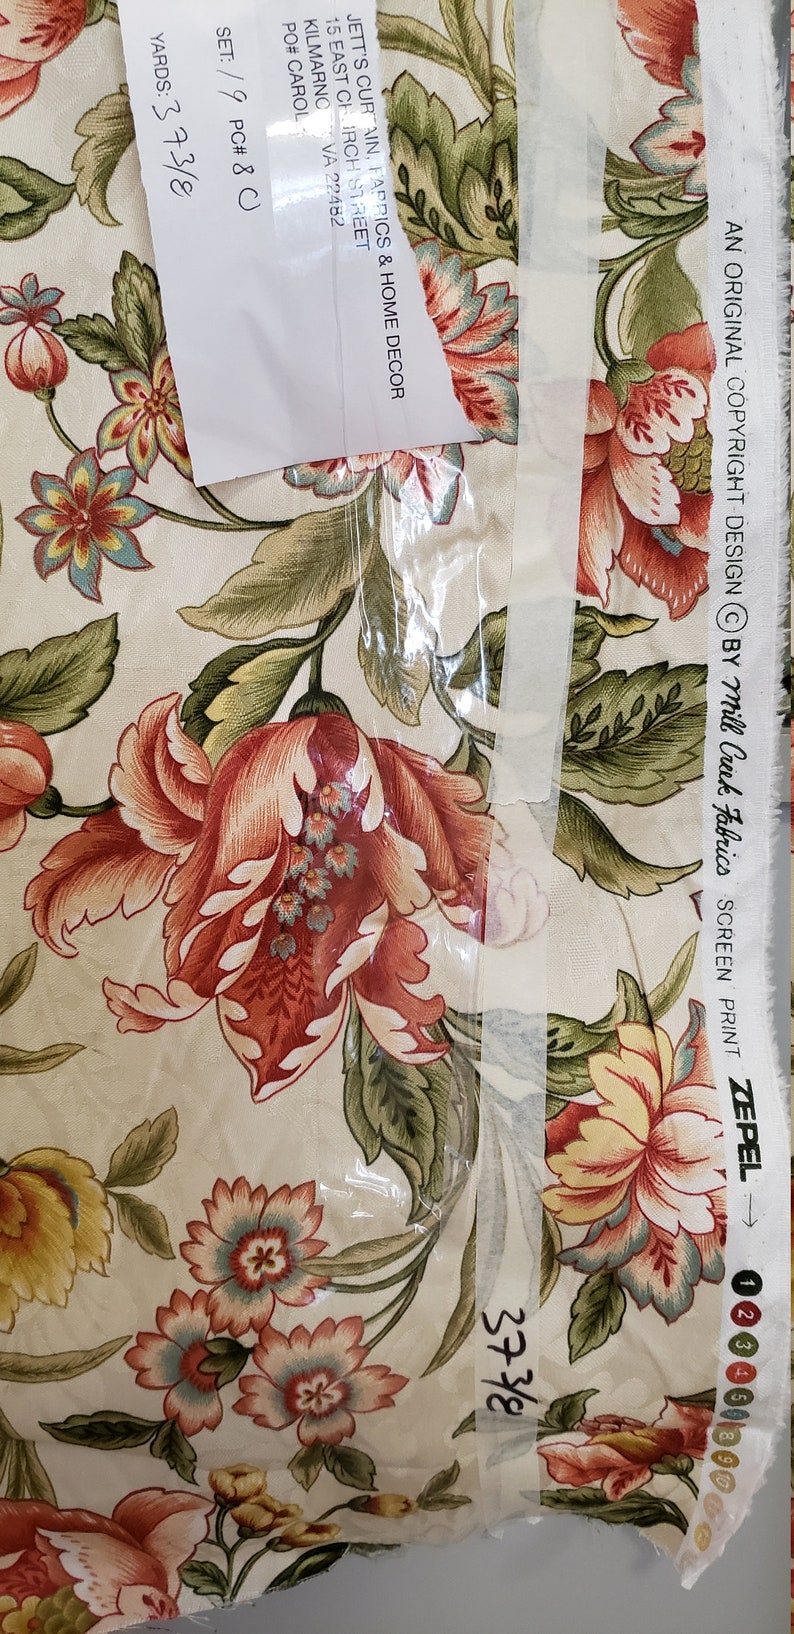 Swavelle Mill Creek Fabric Jacobean Floral Damask Rust | Etsy